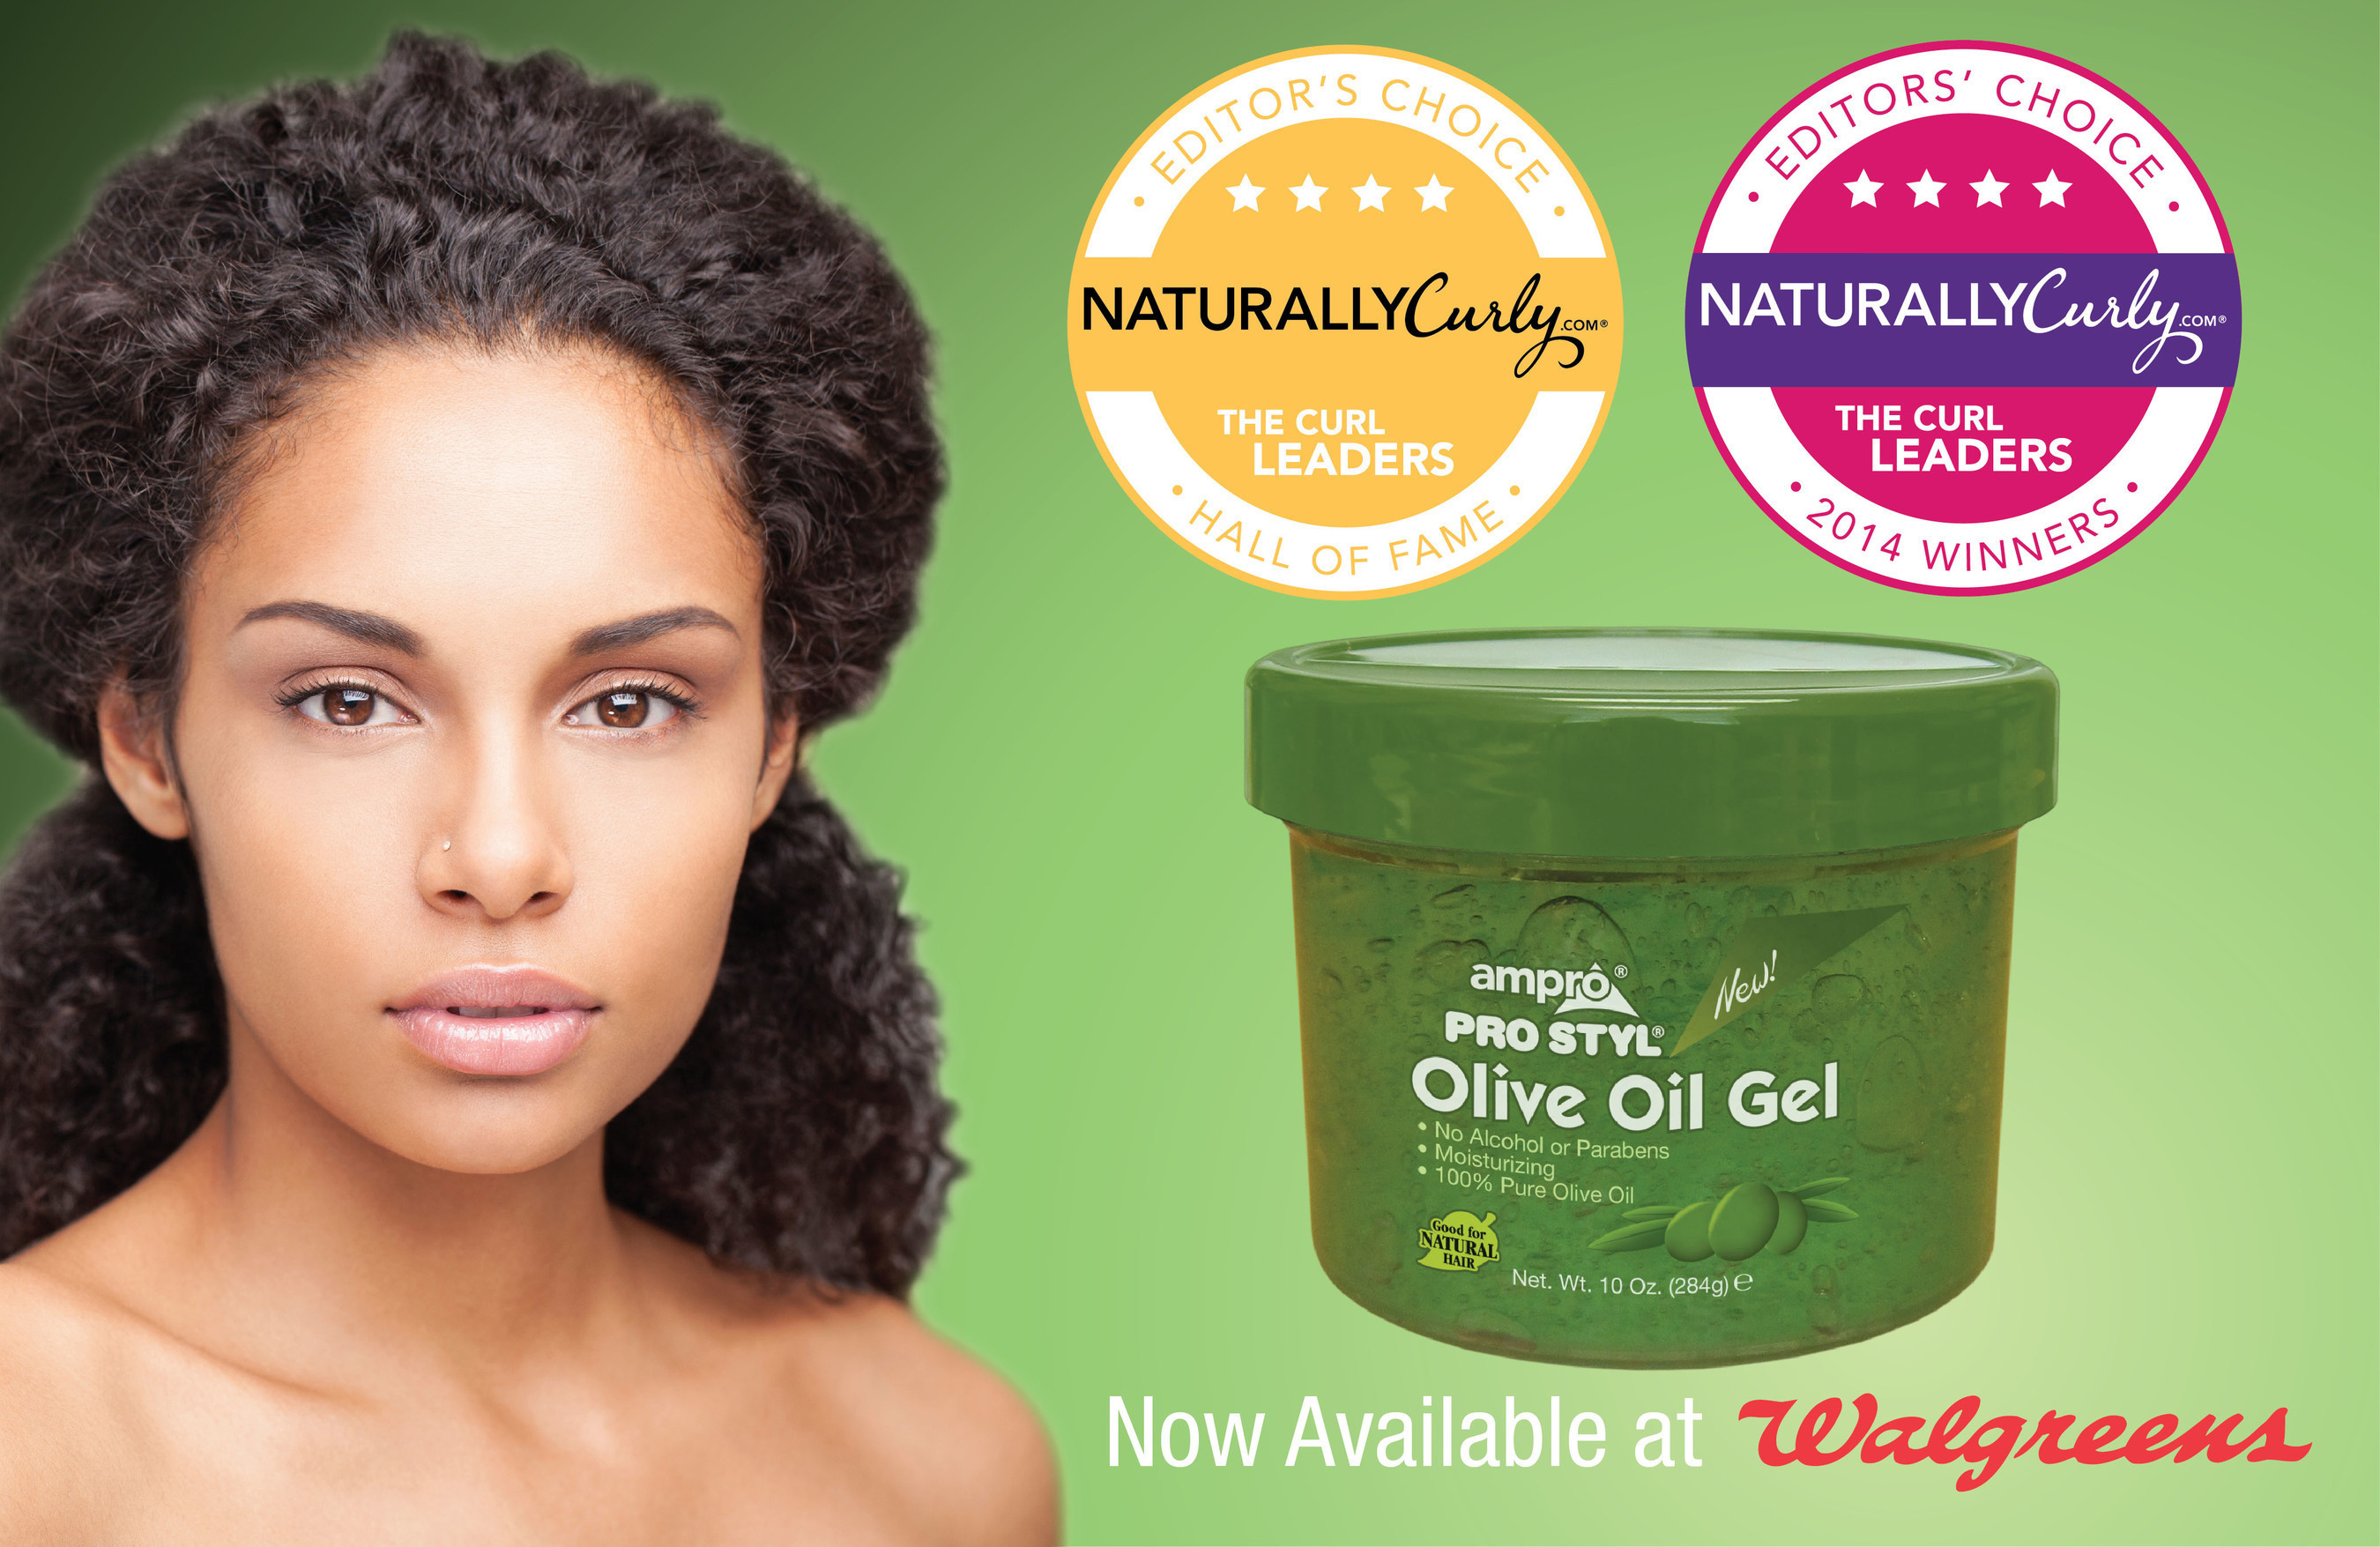 The Award Winning Ampro Pro Styl Olive Oil Gel is Now Available Nationwide at Walgreens (PRNewsFoto/Ampro Industries, Inc.) (PRNewsFoto/Ampro Industries, Inc.)